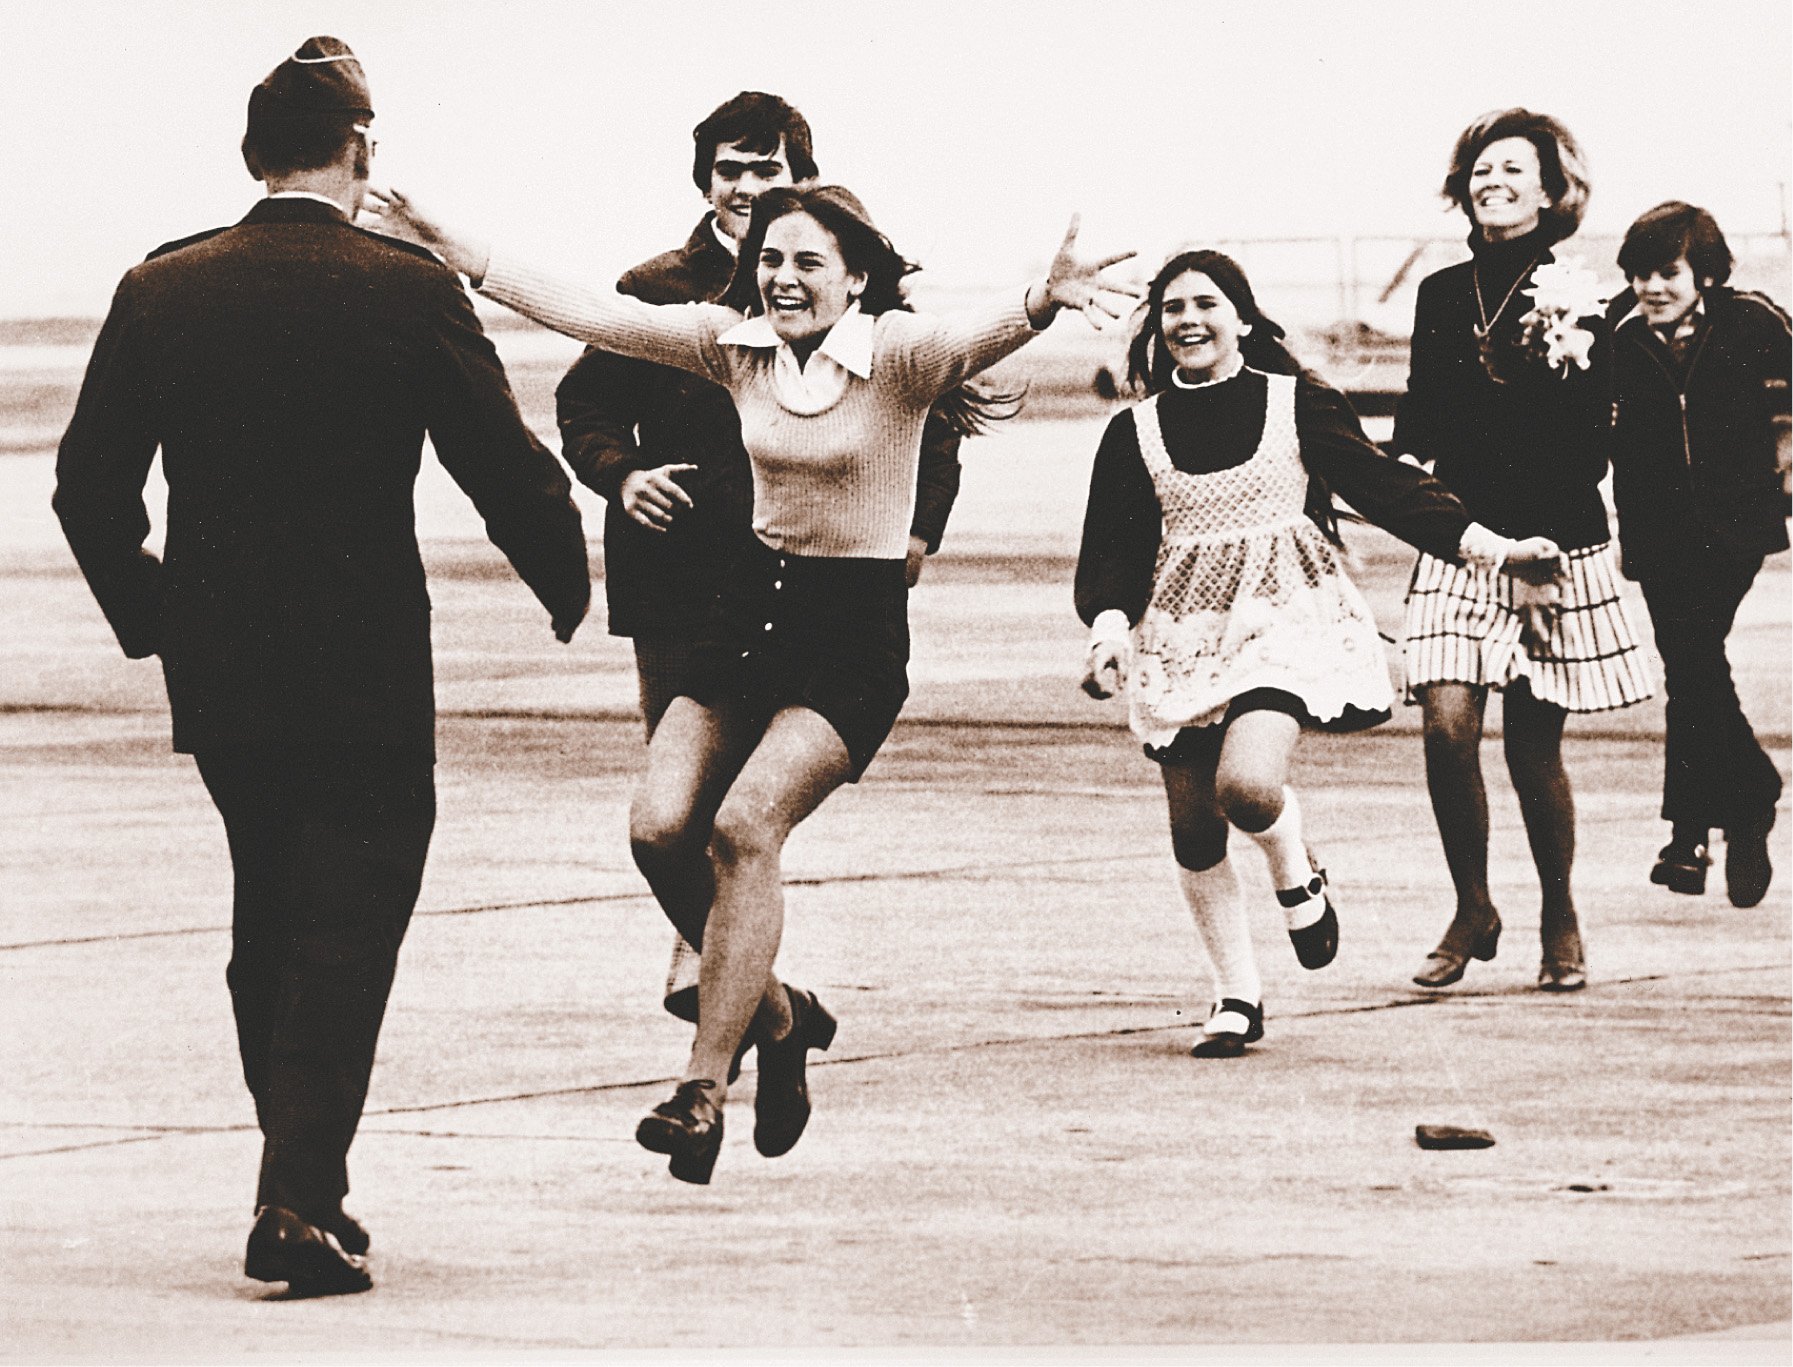 photo: on an airport runway, a man's family comes running to him.